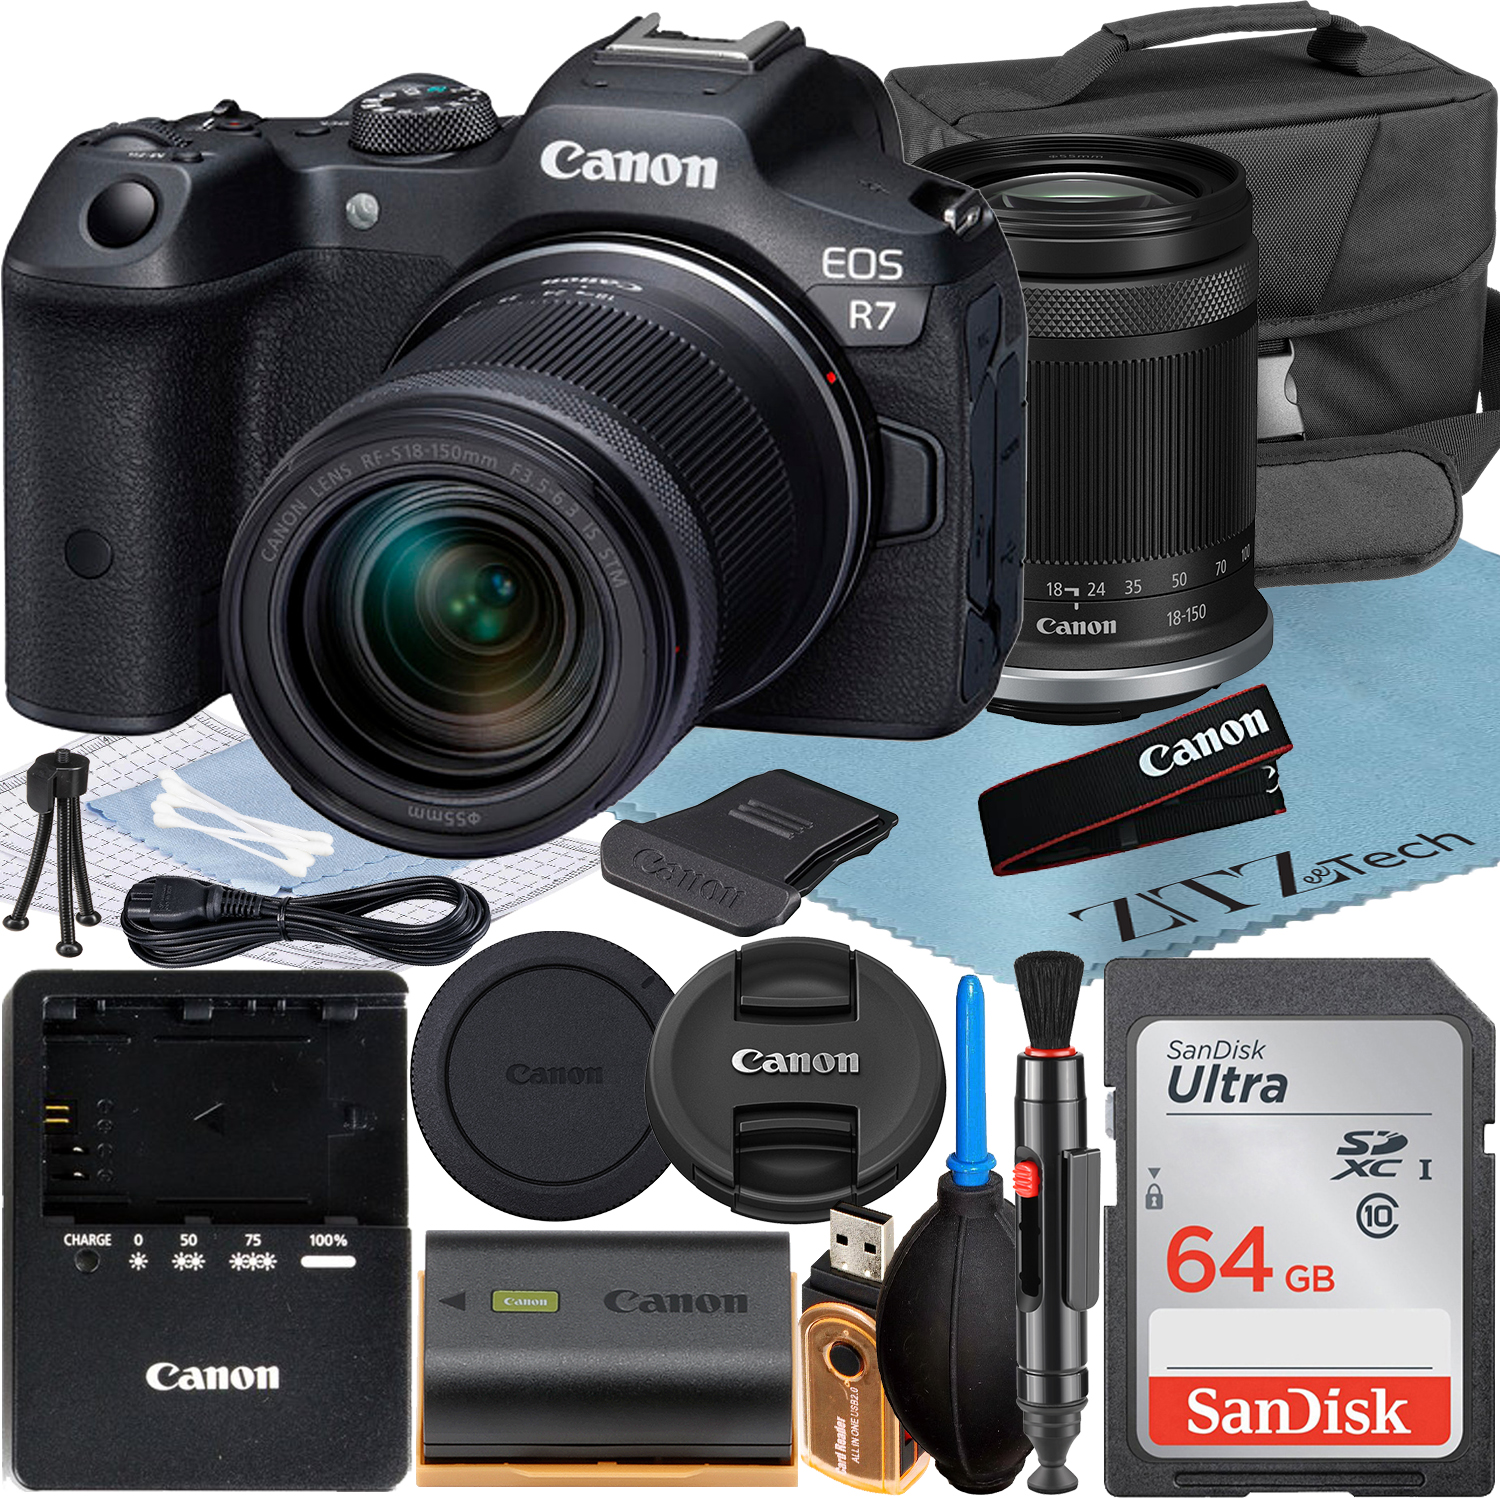 Canon EOS R7 Mirrorless Camera with RF-S 18-150mm Lens + SanDisk 64GB Memory Card + Case + ZeeTech Accessory Bundle